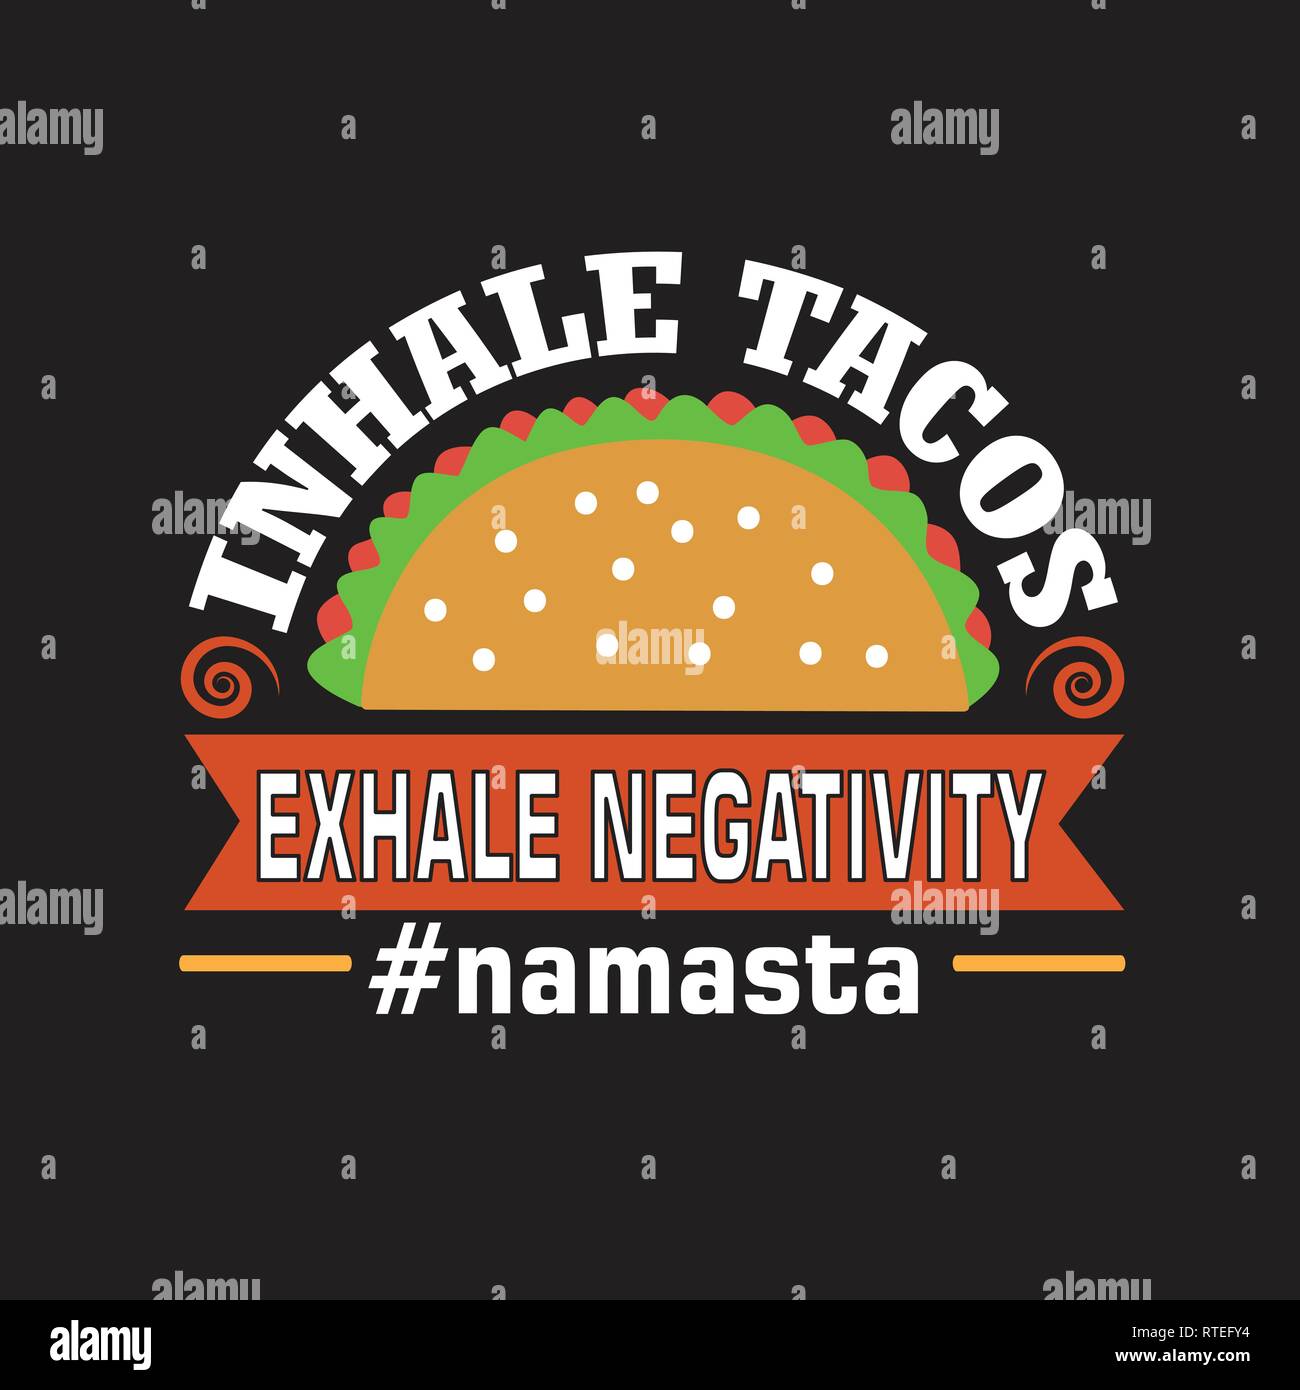 Tacos Quote. Inhale Tacos exhale negativity Stock Vector